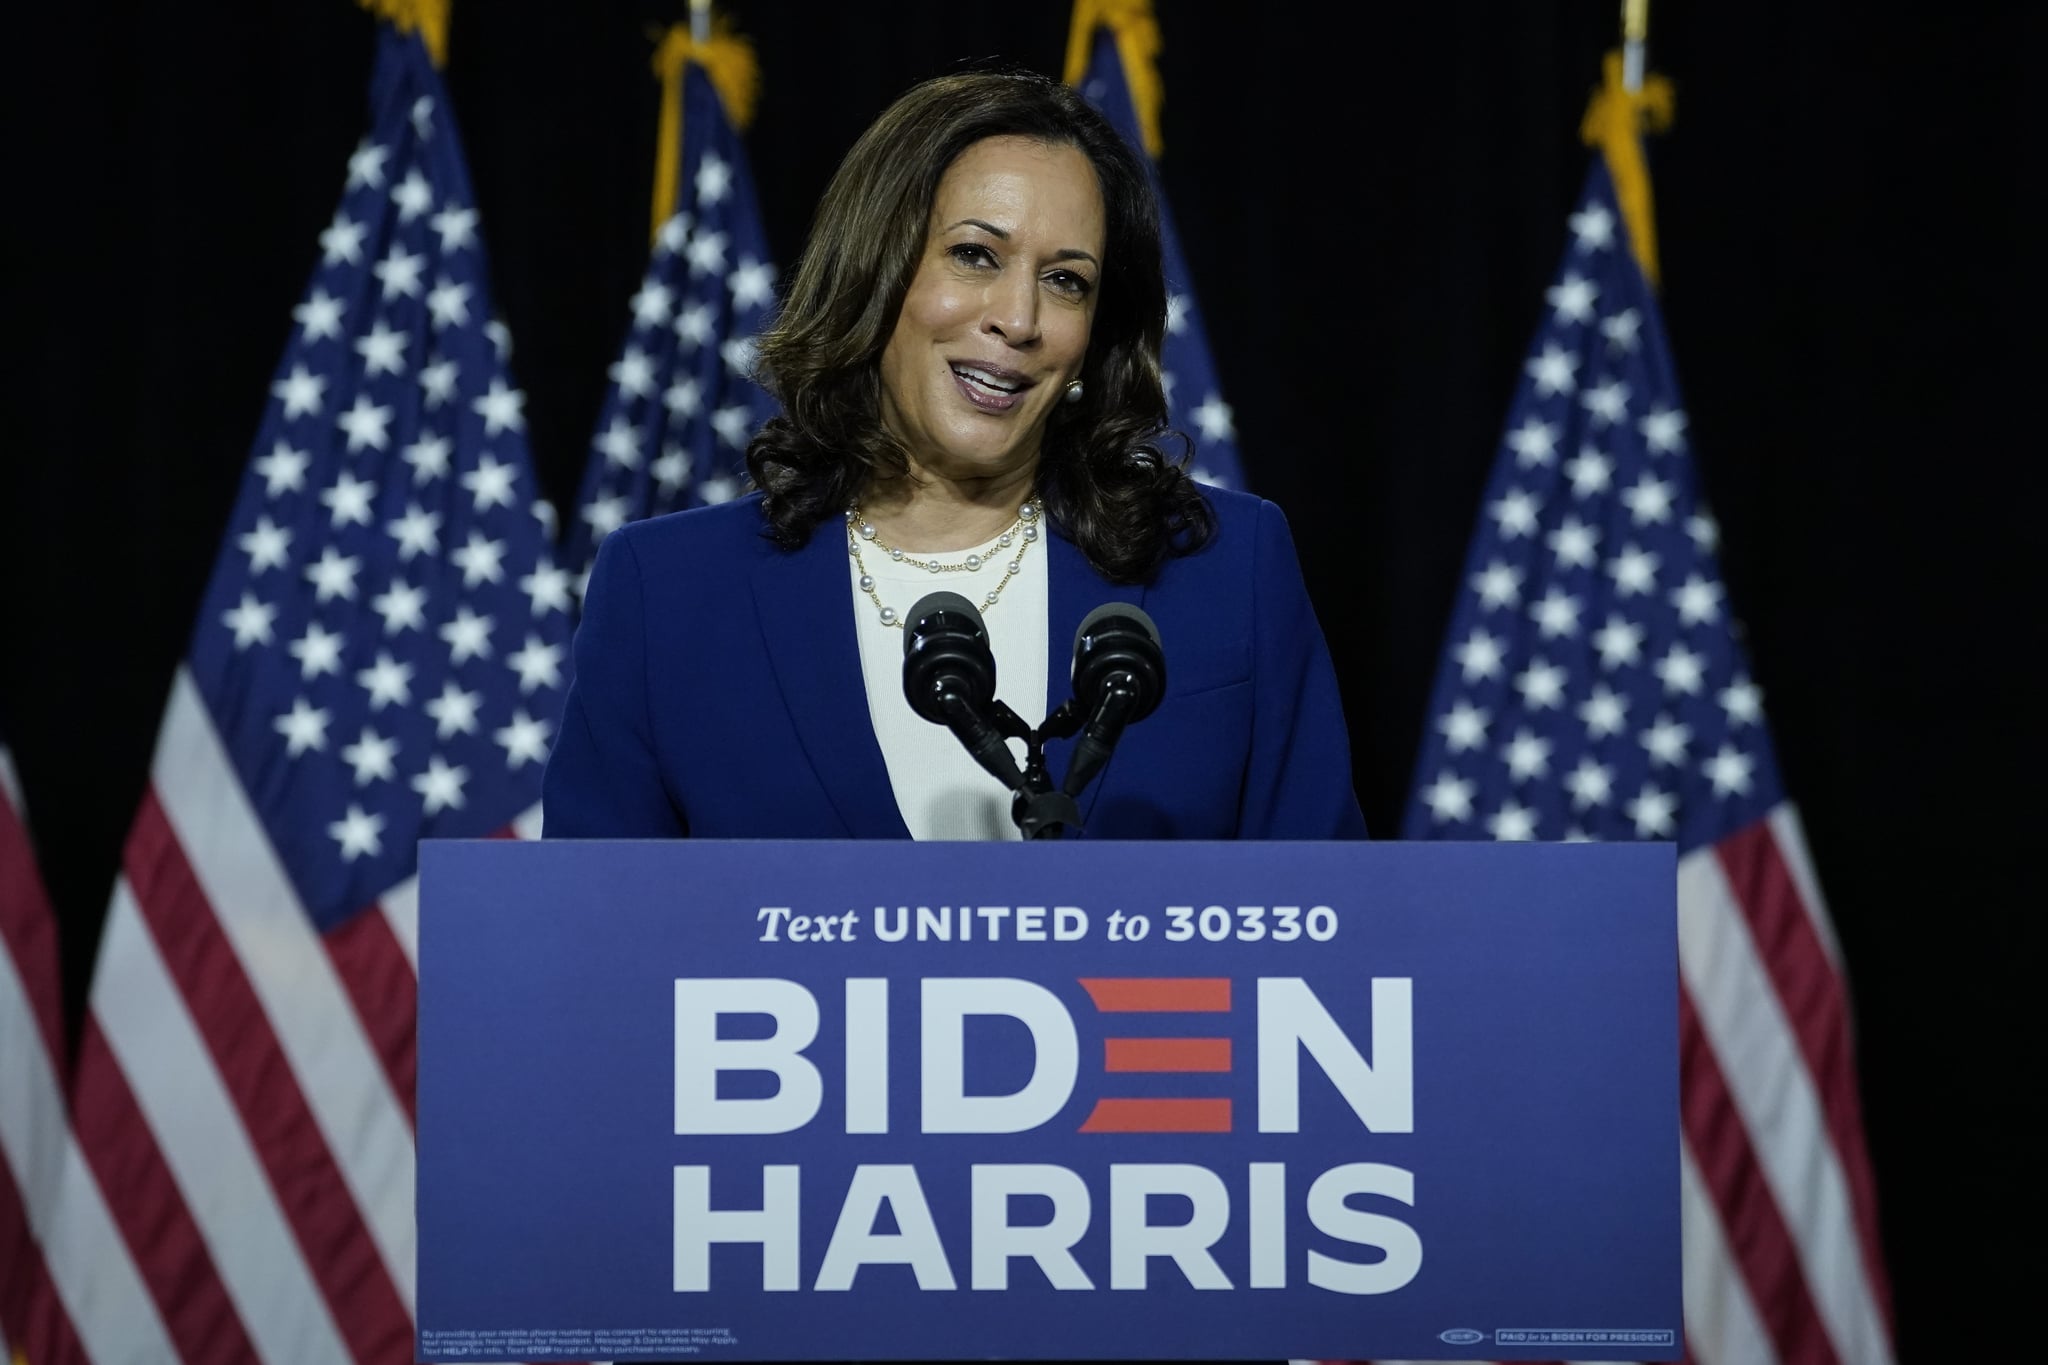 WILMINGTON, DE - AUGUST 12: Democratic presidential candidate former Vice President Joe Biden's running mate Sen. Kamala Harris (D-CA) speaks during an event at the Alexis Dupont High School on August 12, 2020 in Wilmington, Delaware. Harris is the first Black woman and first person of Indian descent to be a presumptive nominee on a presidential ticket by a major party in U.S. history. (Photo by Drew Angerer/Getty Images)